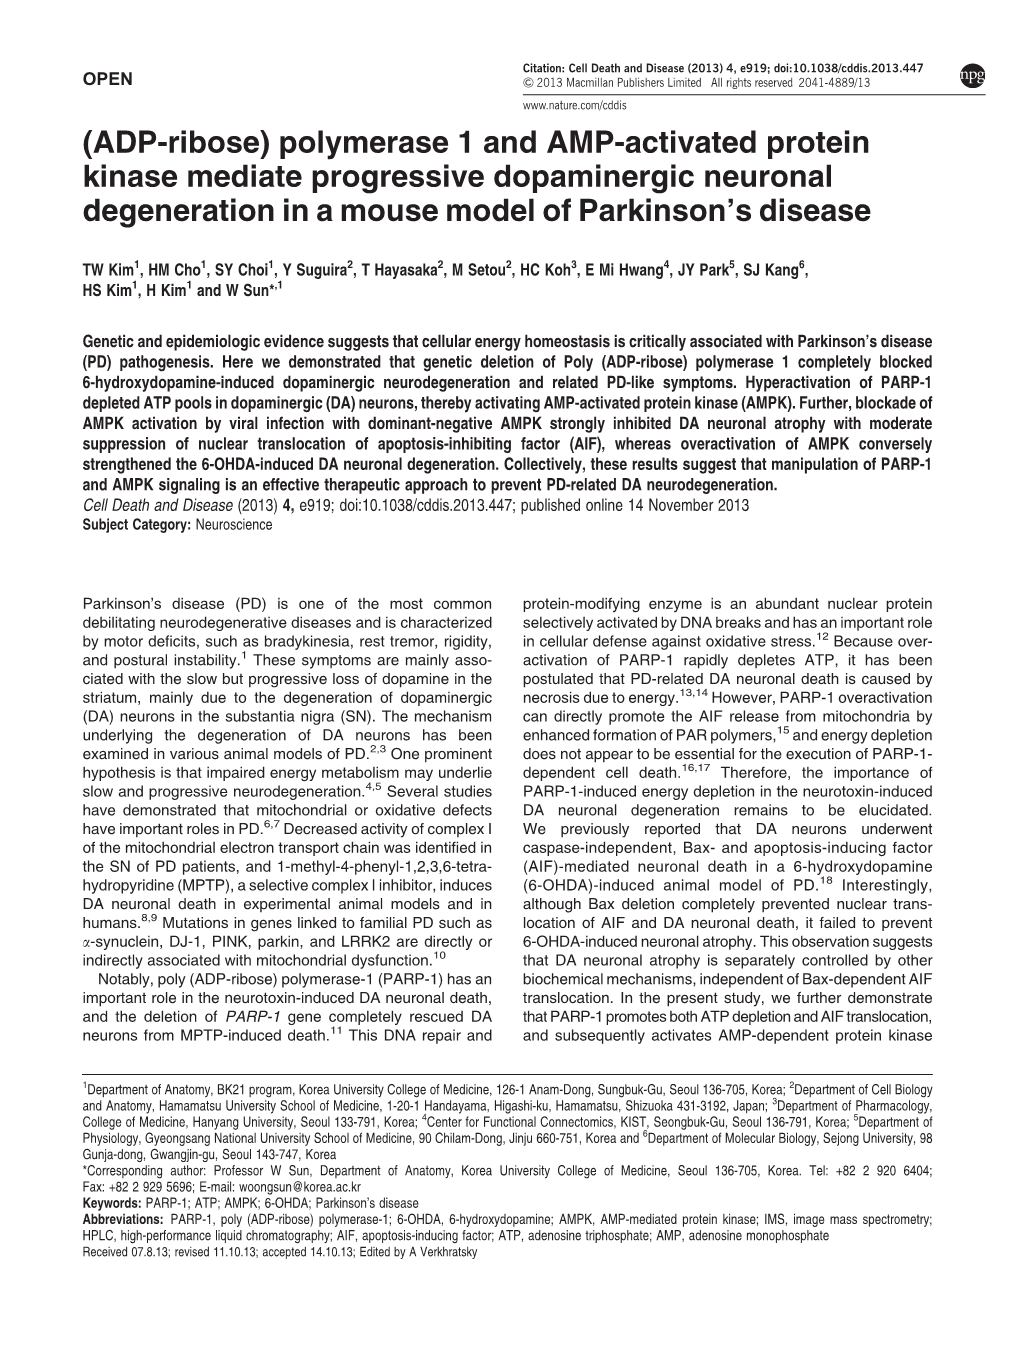 ADP-Ribose) Polymerase 1 and AMP-Activated Protein Kinase Mediate Progressive Dopaminergic Neuronal Degeneration in a Mouse Model of Parkinson’S Disease